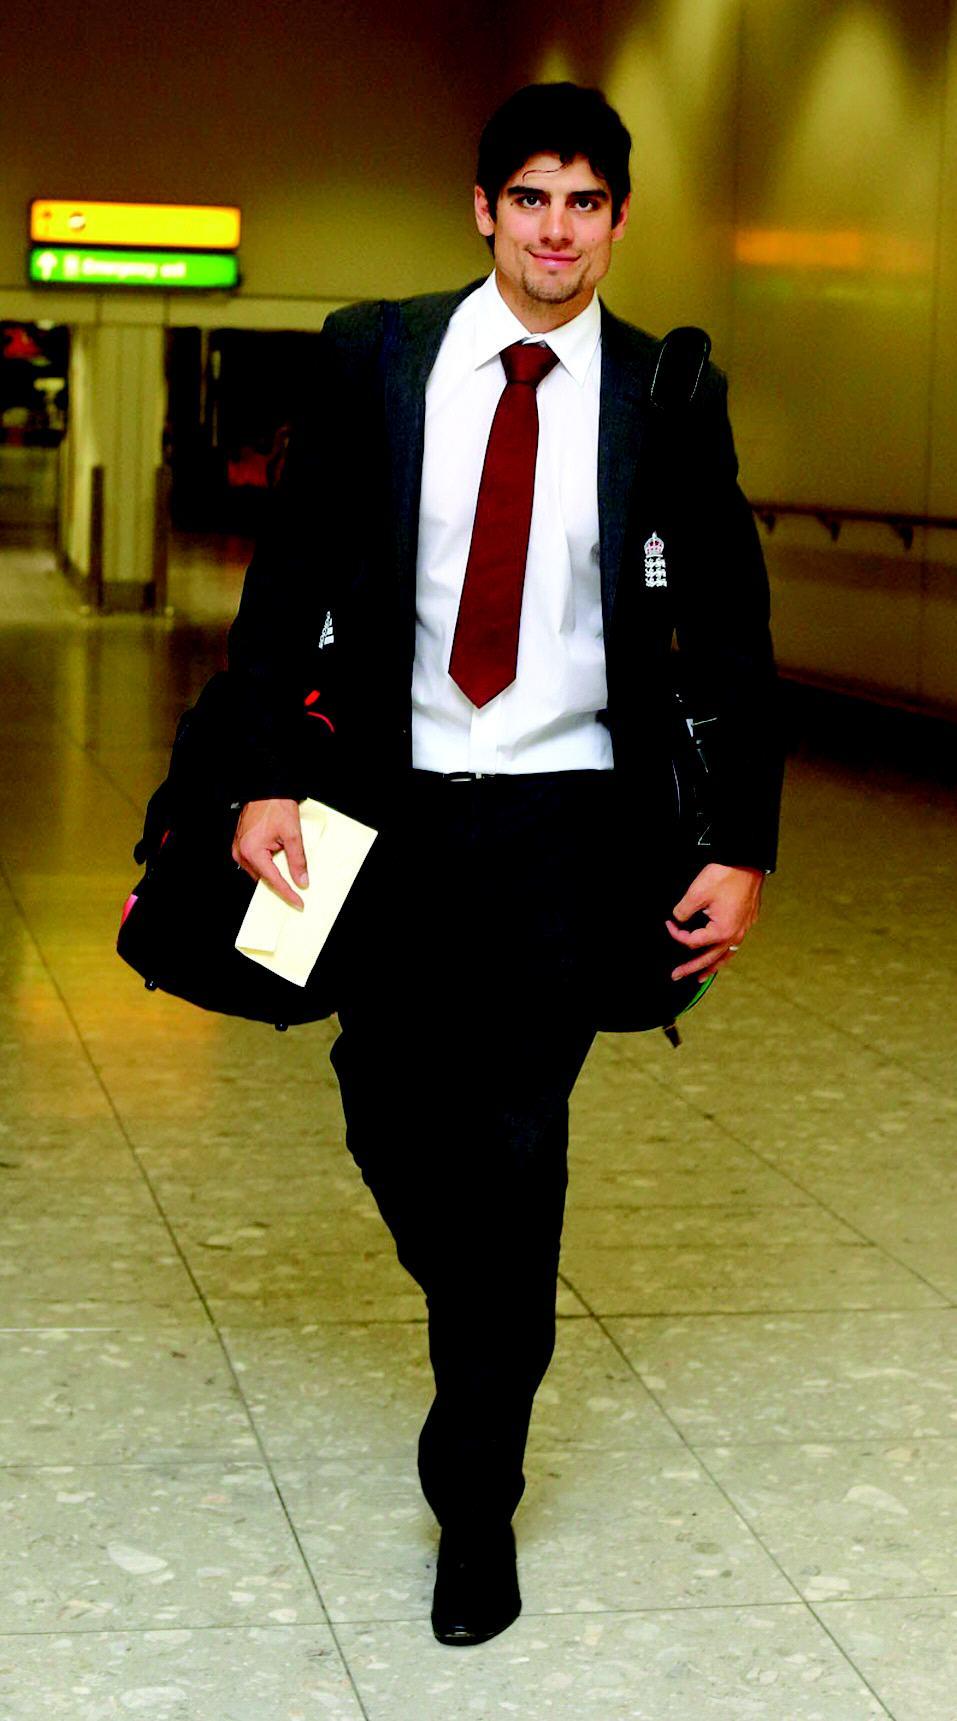 Alastair Cook England Cricket Player Full Picture in AirPort